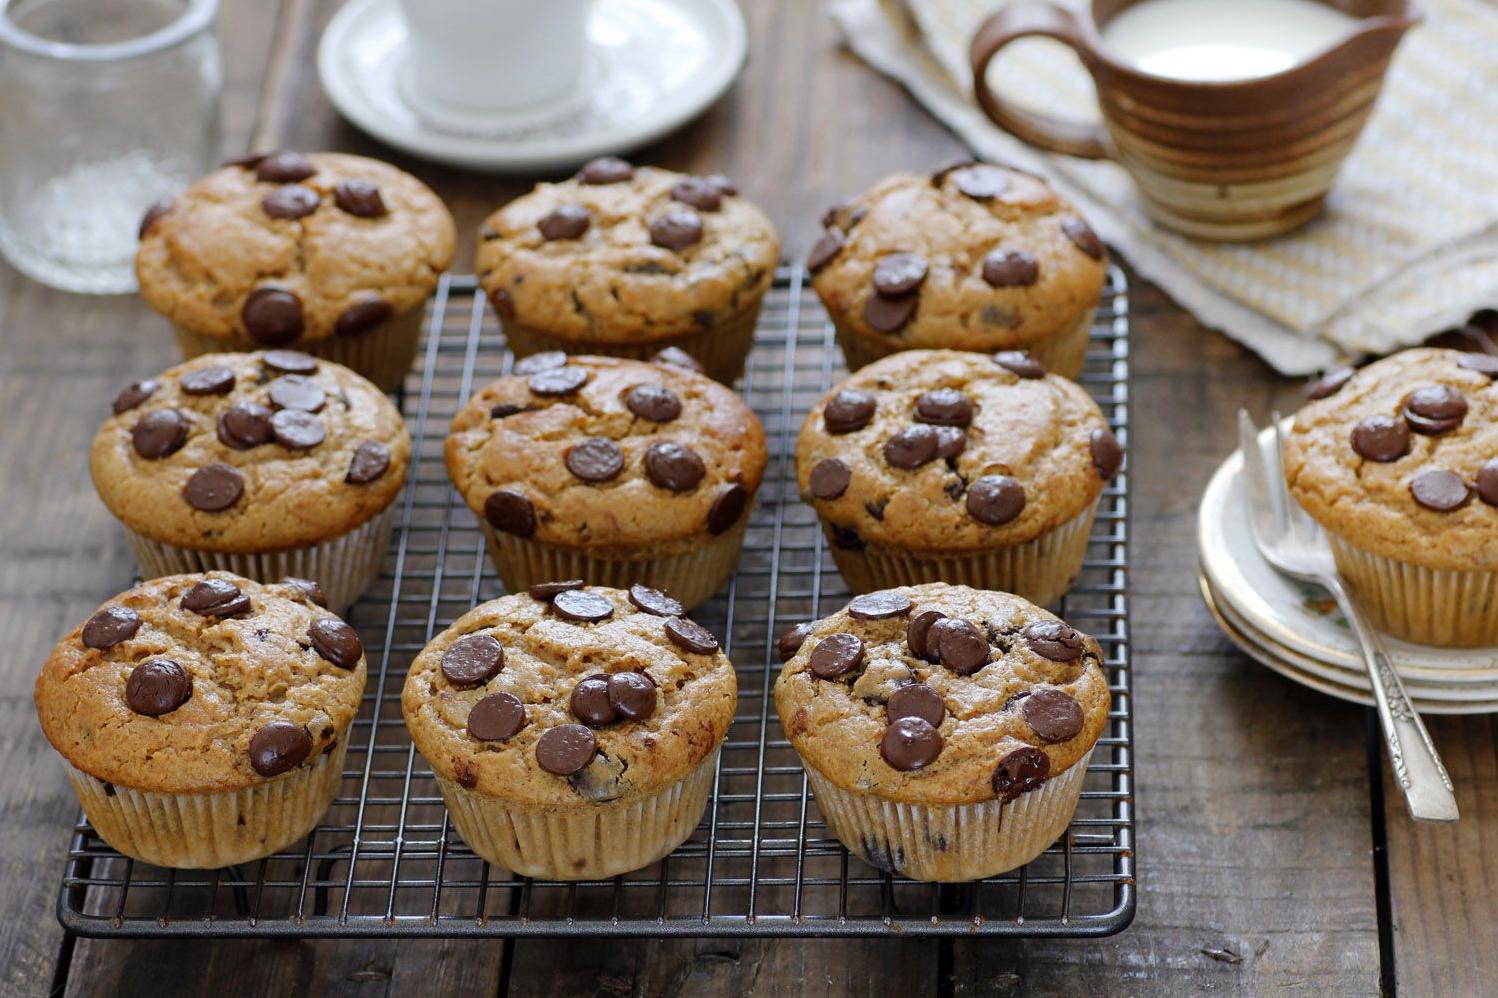  These muffins are perfect for an indulgent morning treat.